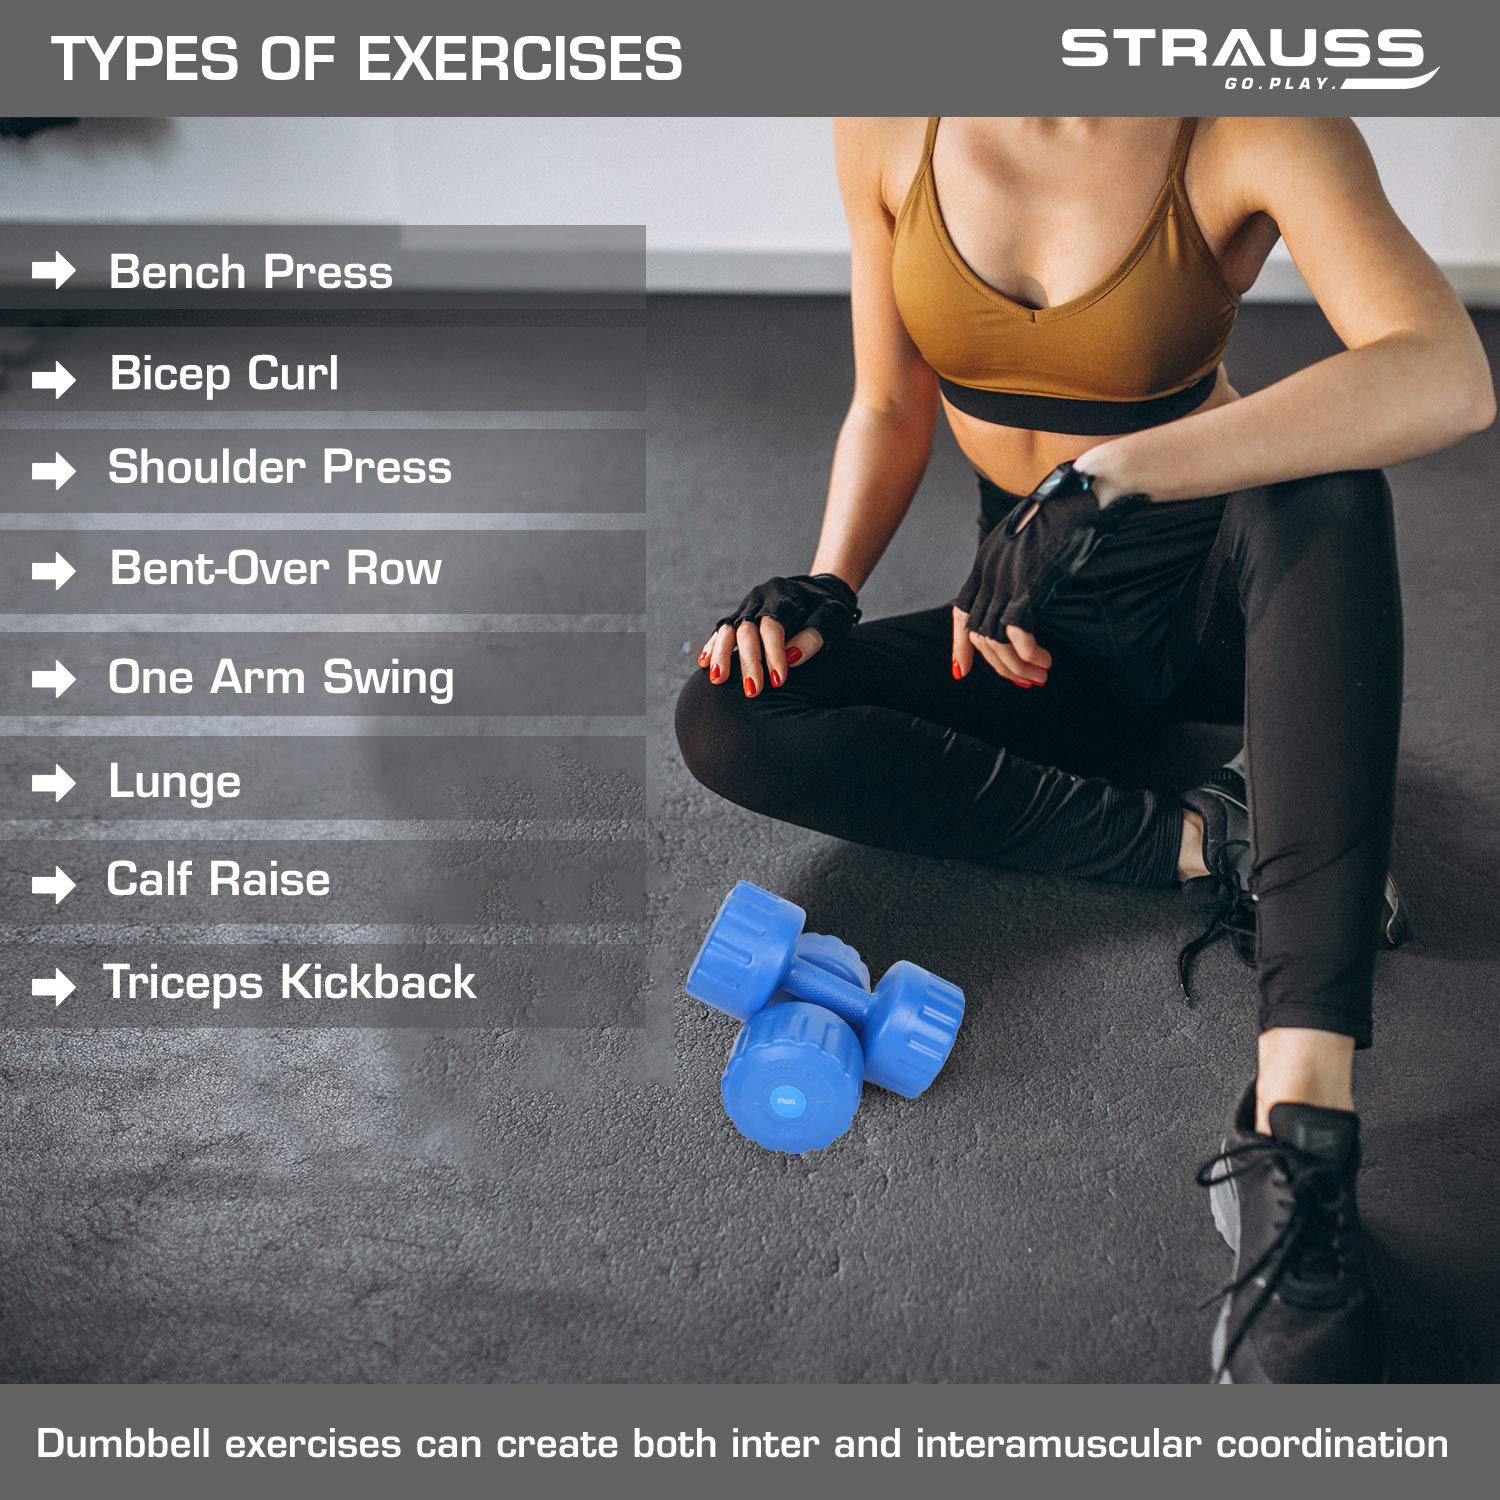 Strauss Unisex PVC Dumbbells Weight for Men & Women | 2Kg (Each)| 4Kg (Pair) | Ideal for Home Workout and Gym Exercises (Blue)